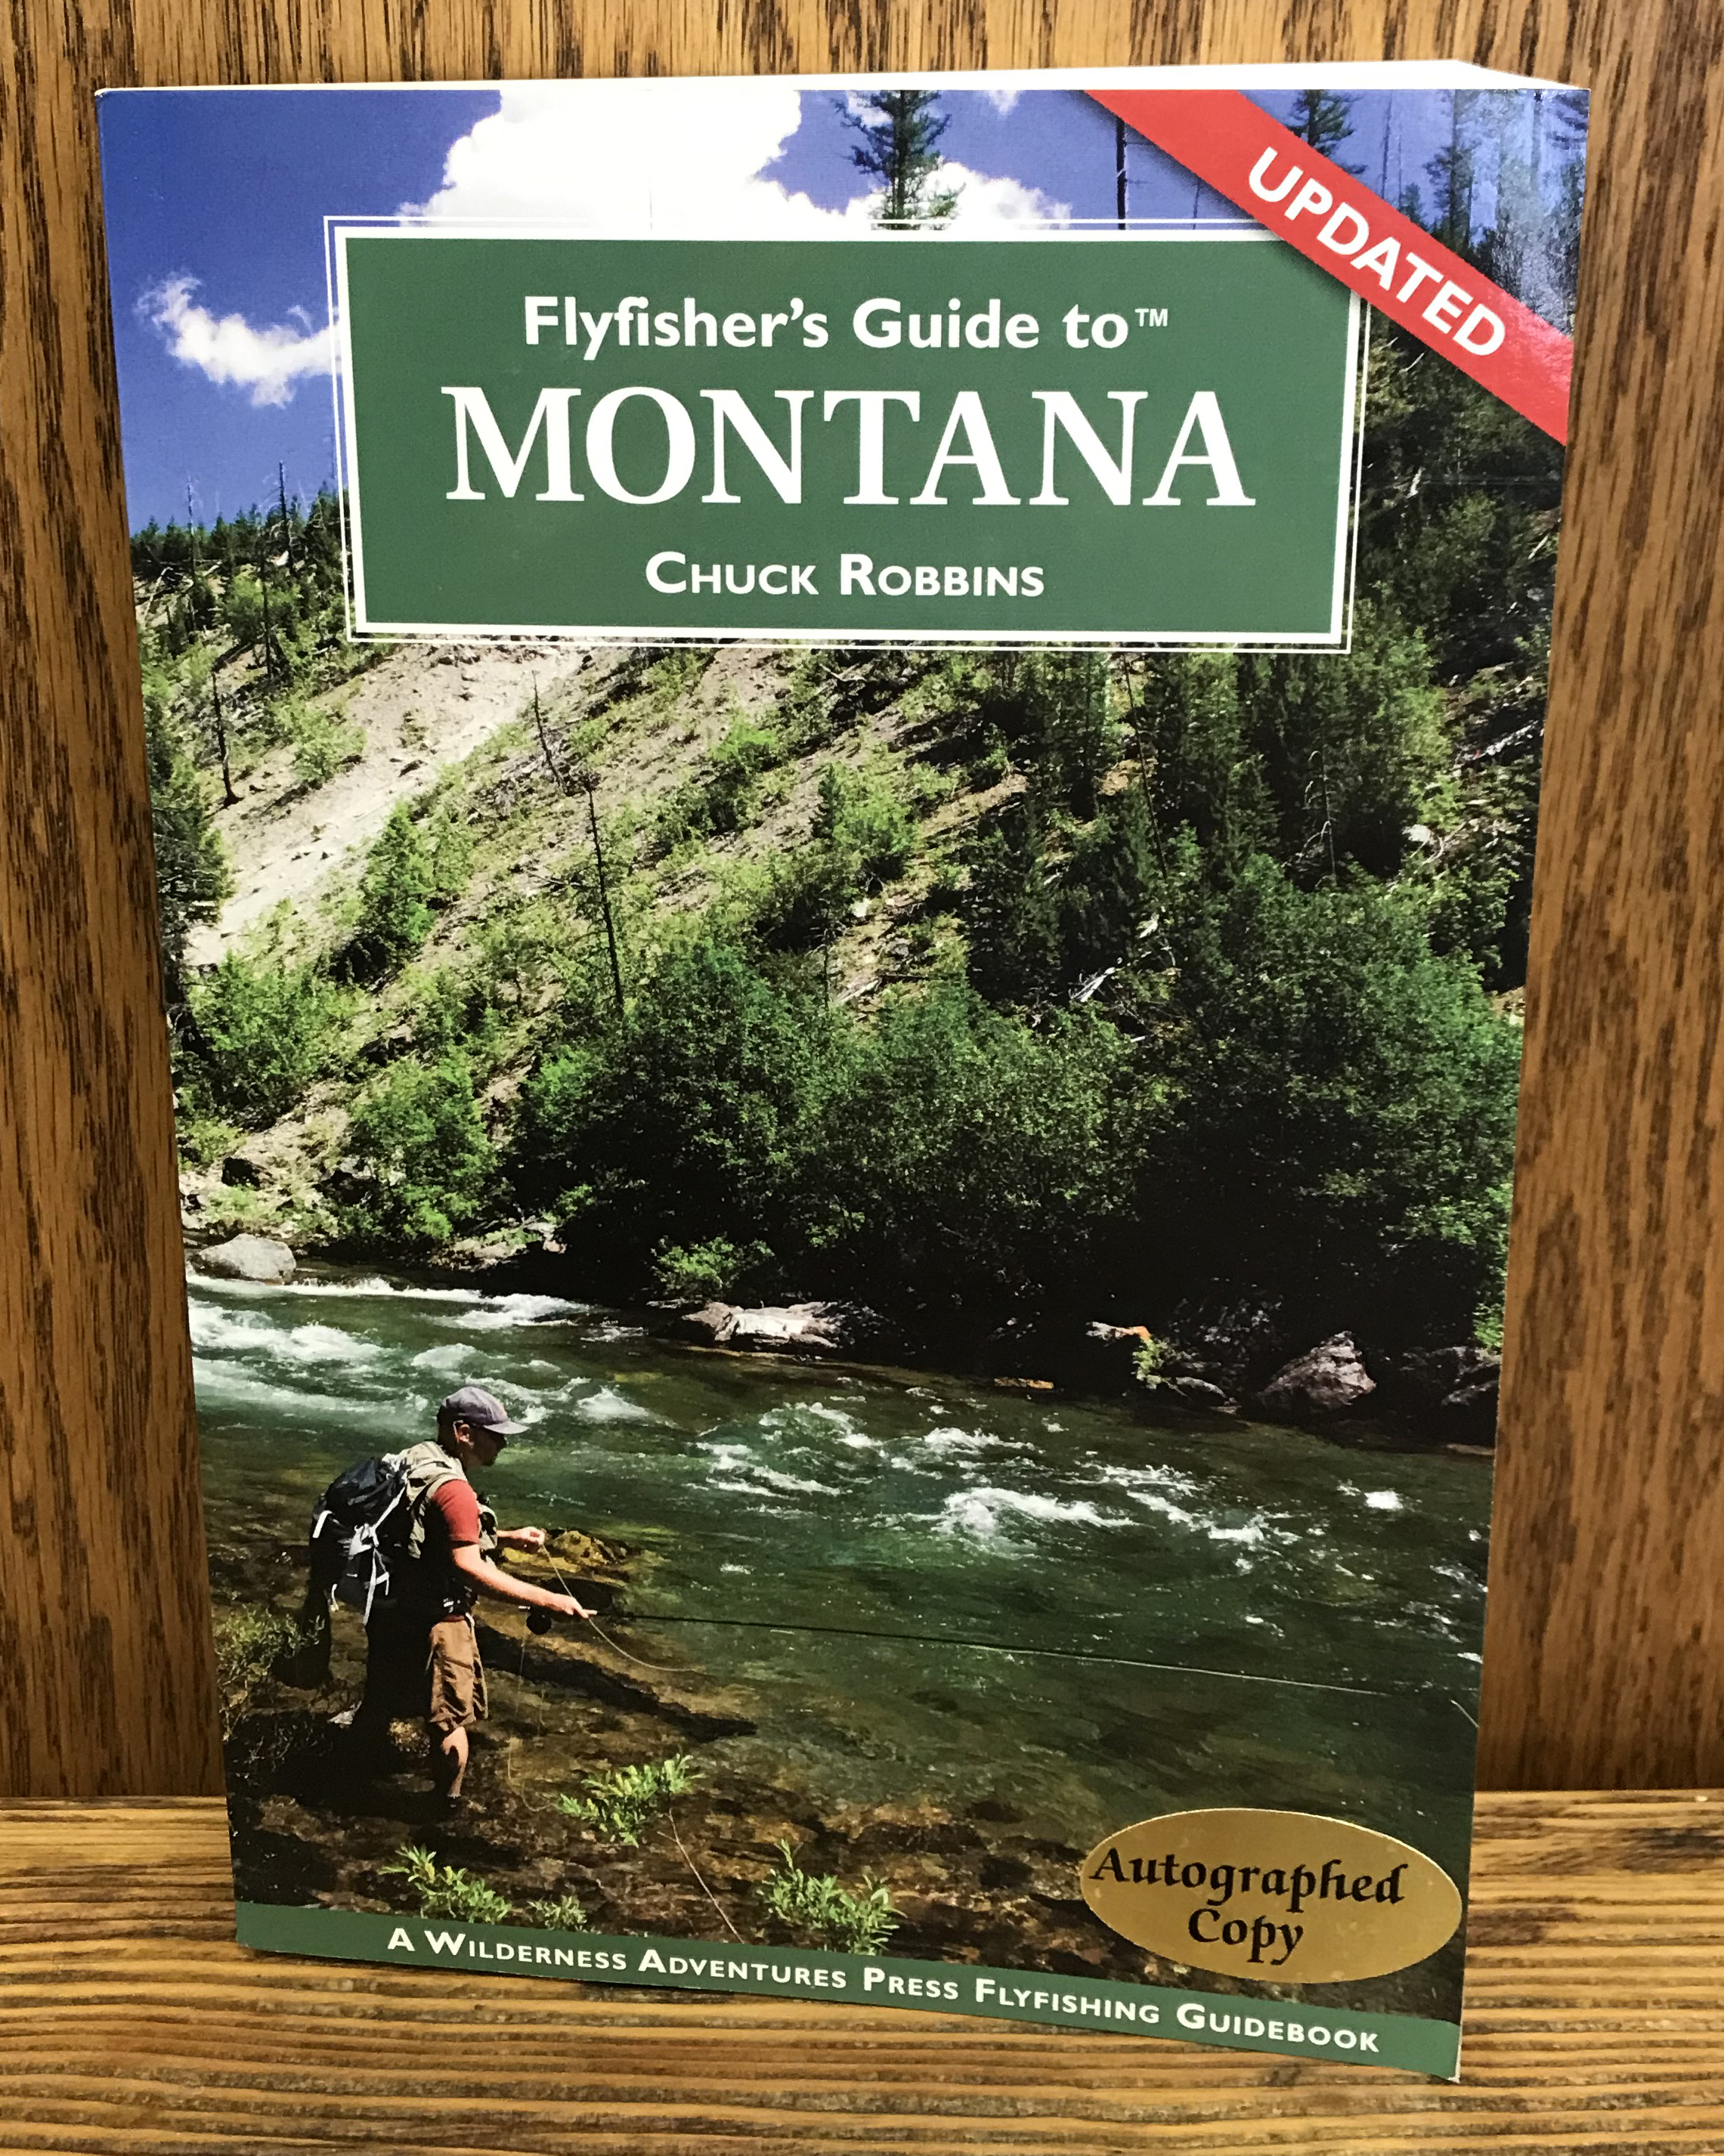 https://wildtroutoutfitters.com/wp-content/uploads/2020/05/Flyfishers-Guide-to-Montana-by-Chuck-Robbins.jpg